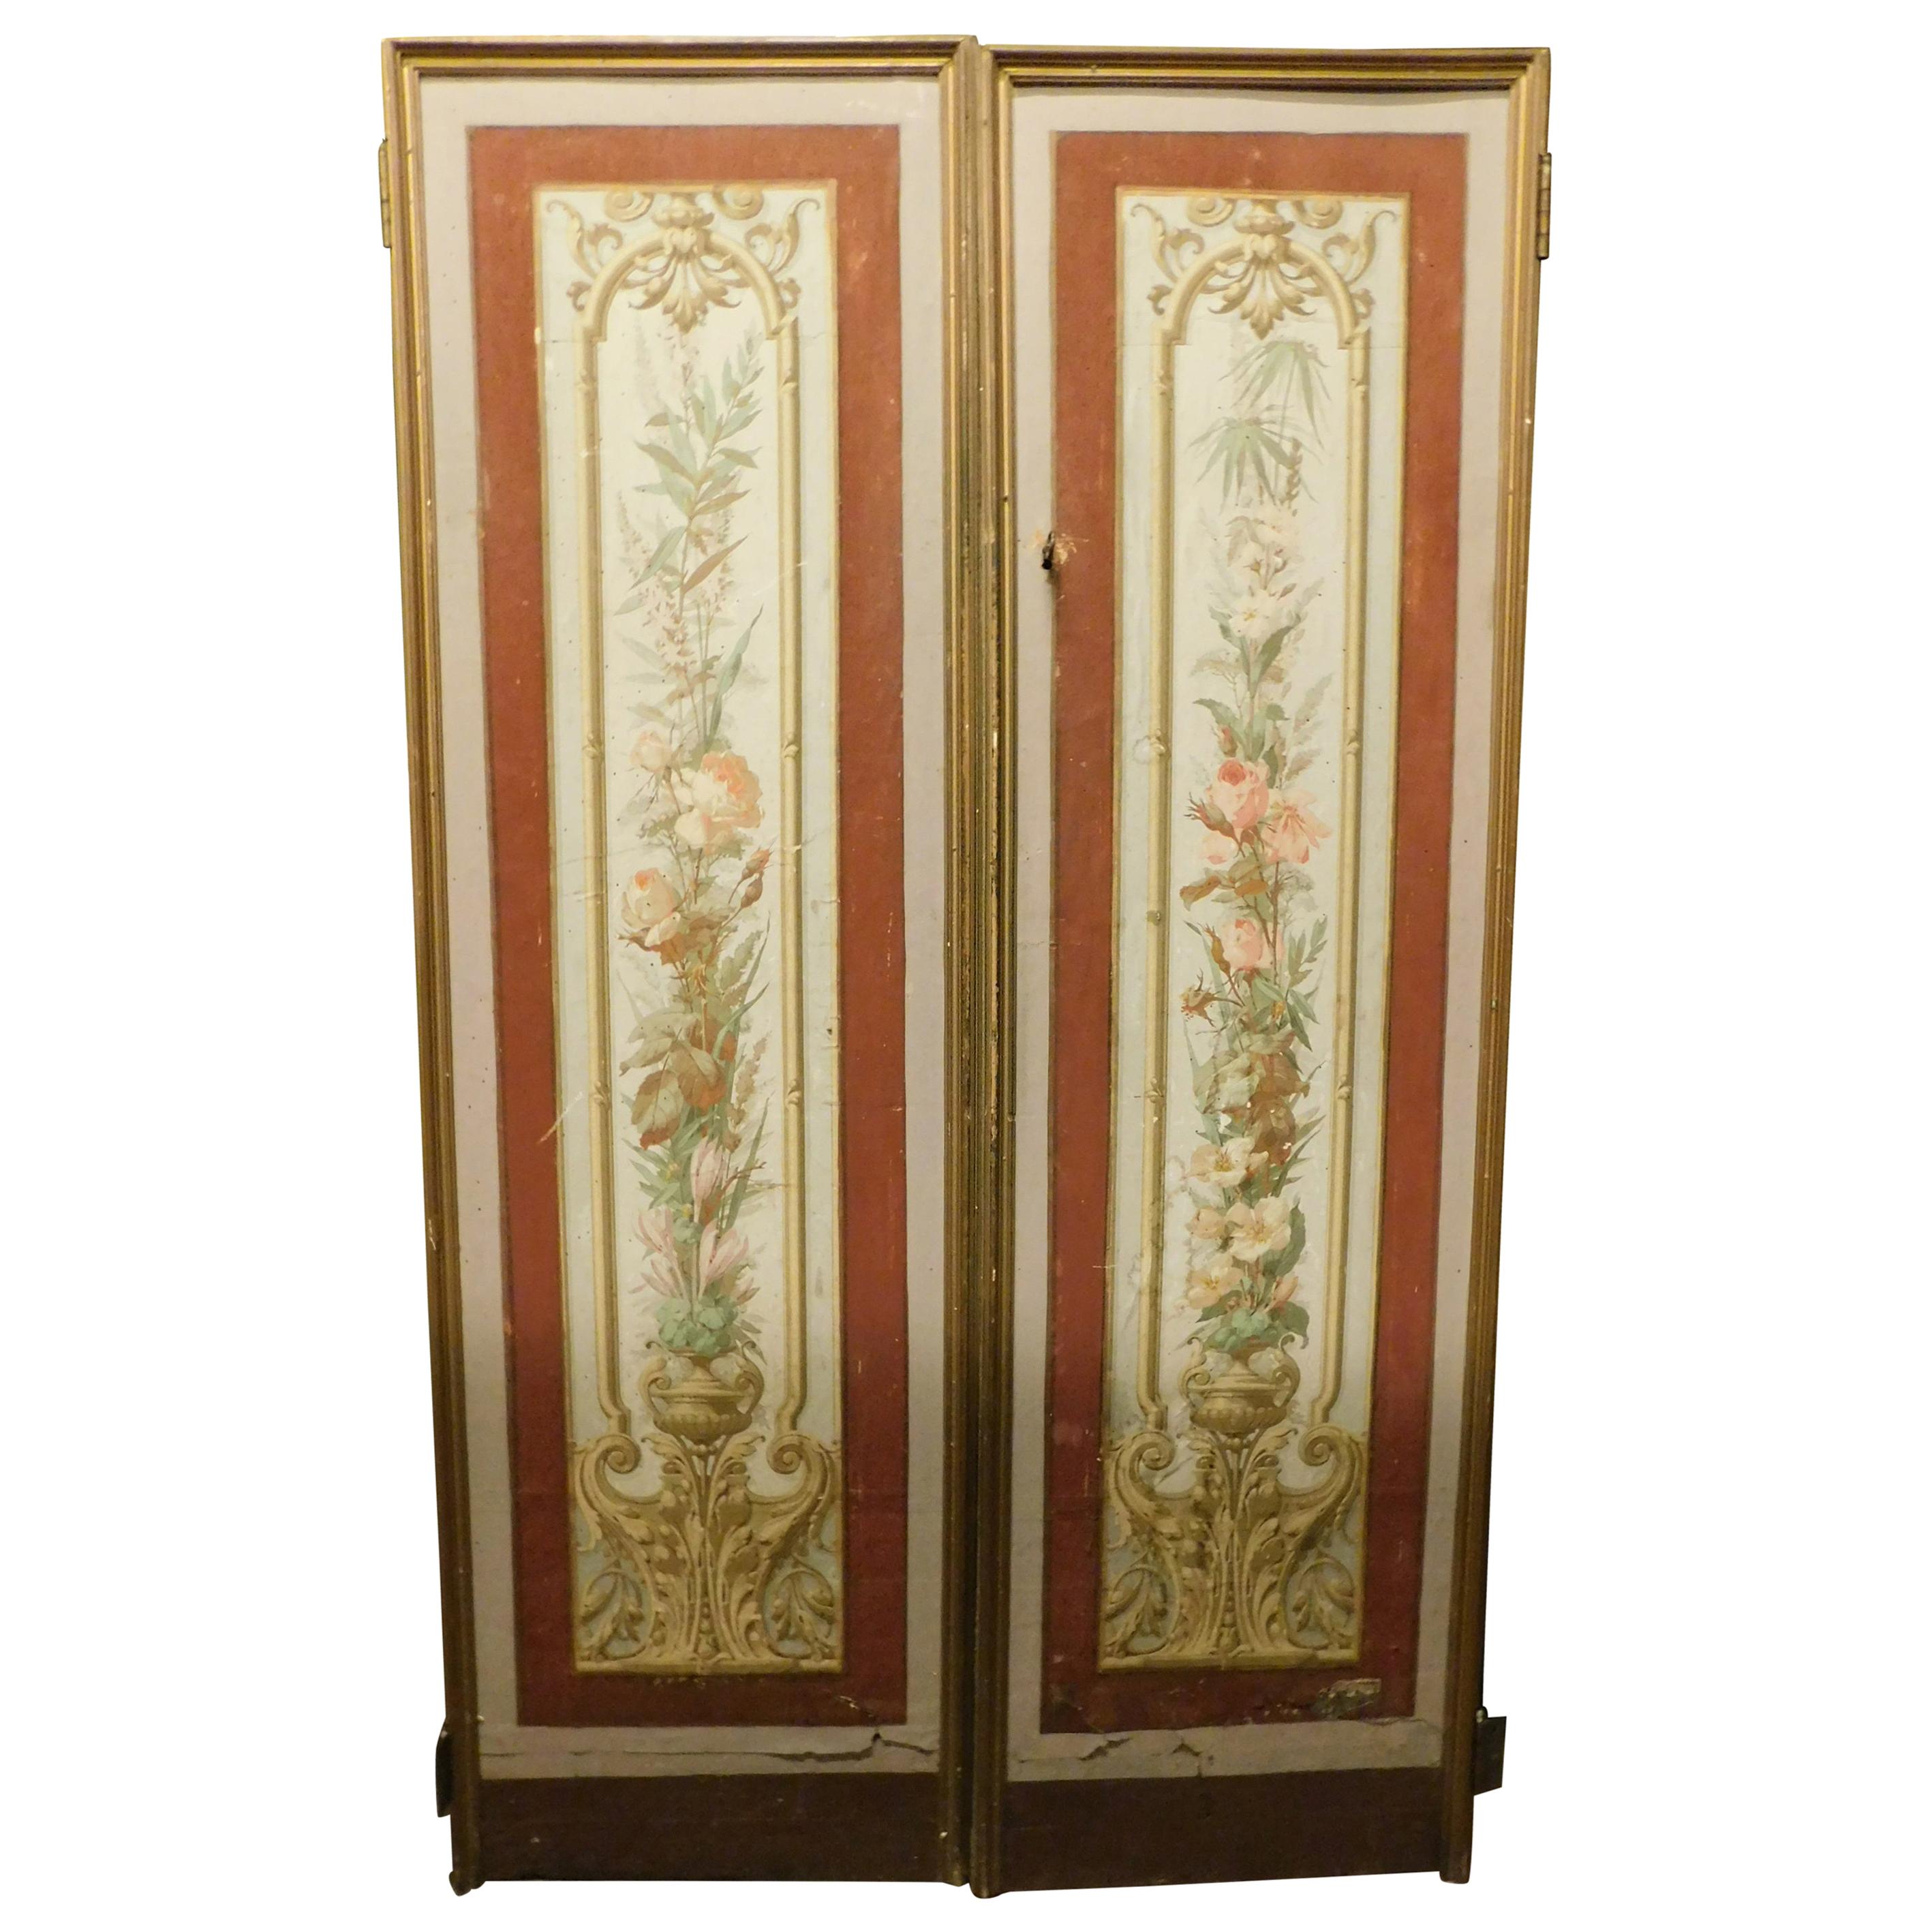 Vintage Pair of Lacquered and Painted Doors, Art Nouveau, Liberty, Early 1900s